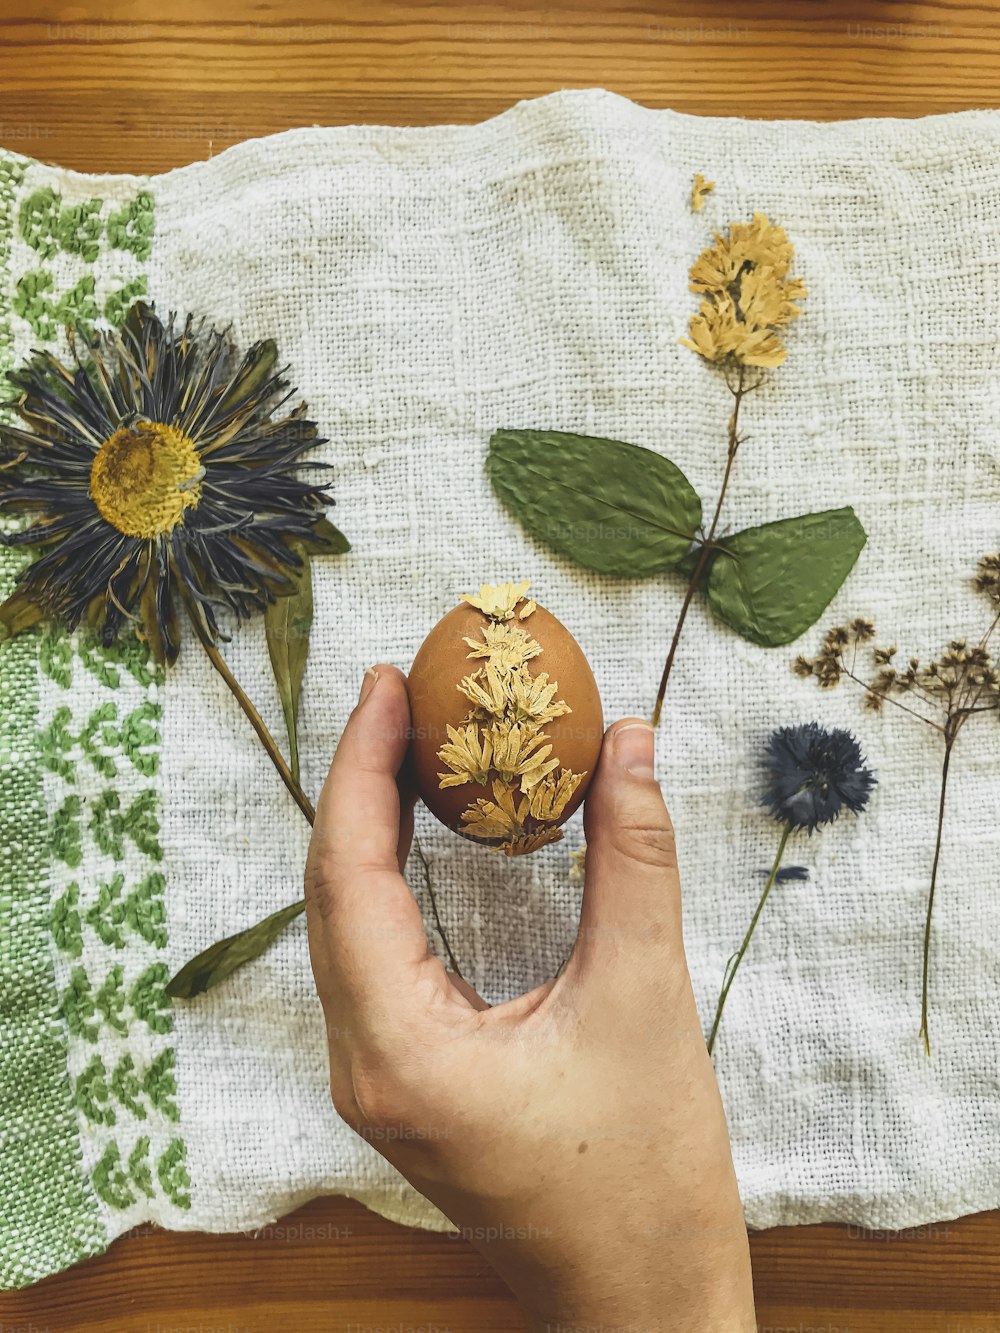 Hand holding Easter egg decorated with dry flower on background of linen napkin and wildflowers. Top view. Creative natural eco friendly decor of easter eggs